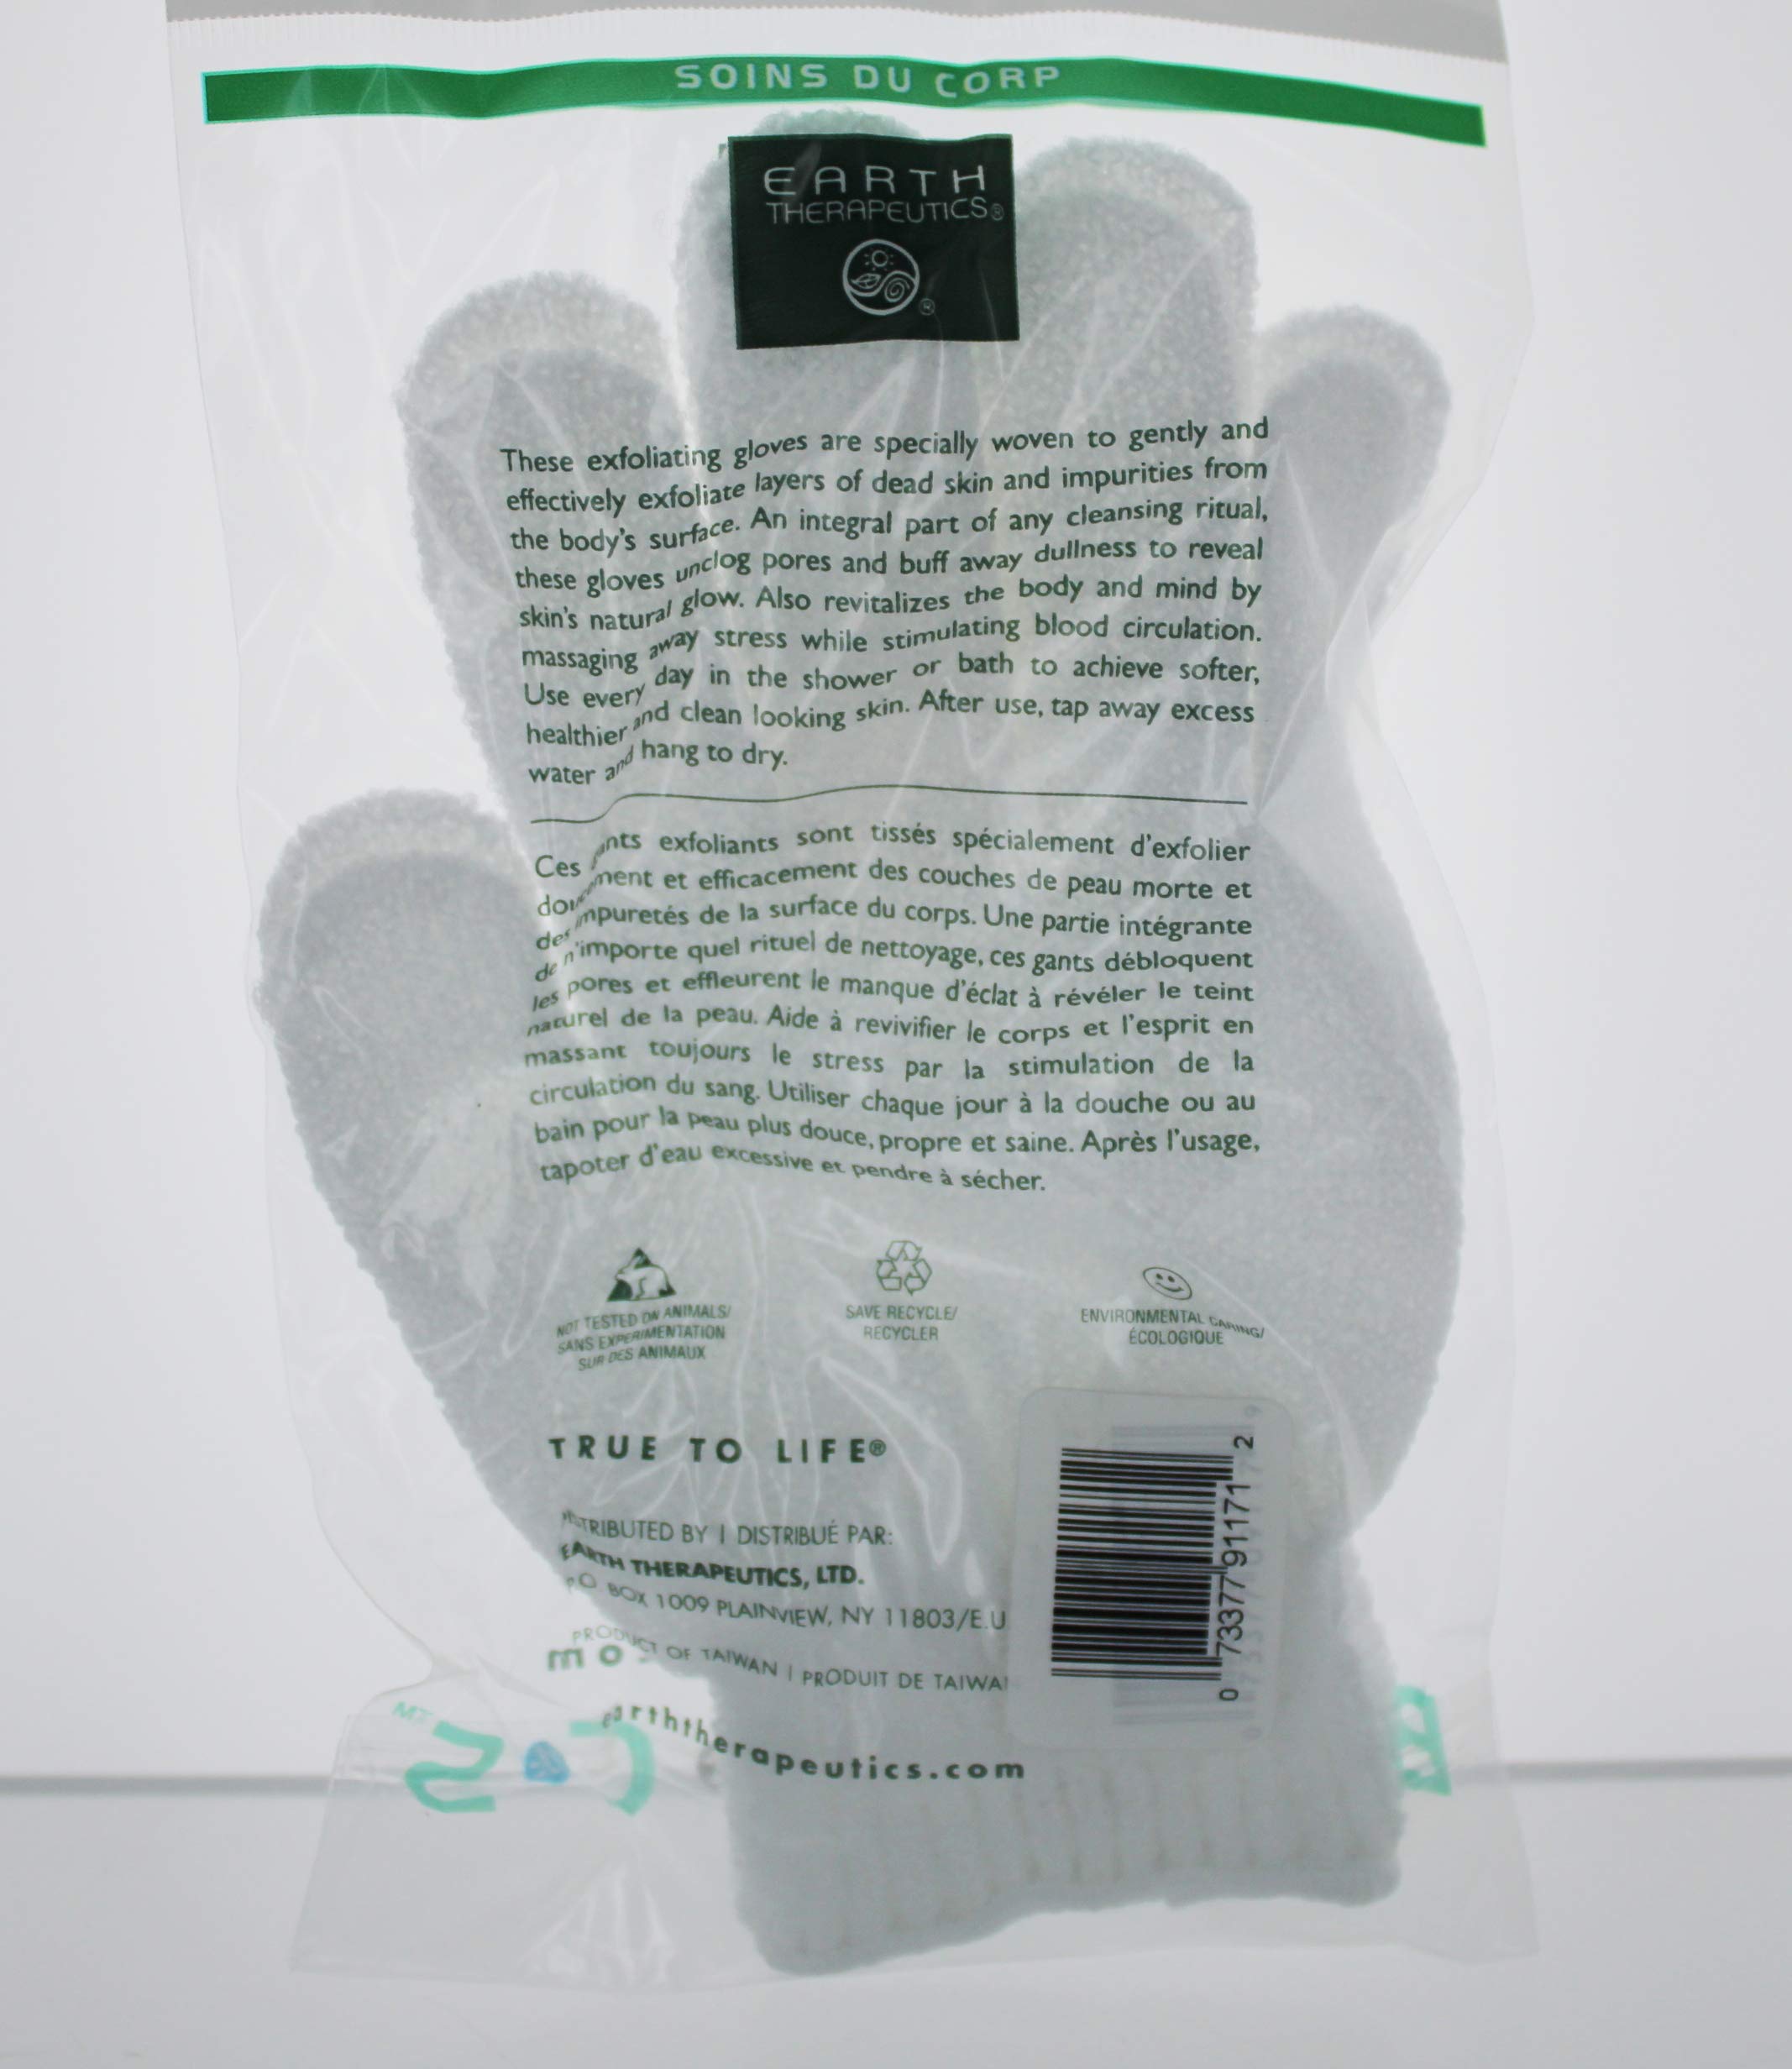 Earth Therapeutics Hydro Exfoliating Gloves, White, 1 pair (Pack of 4)